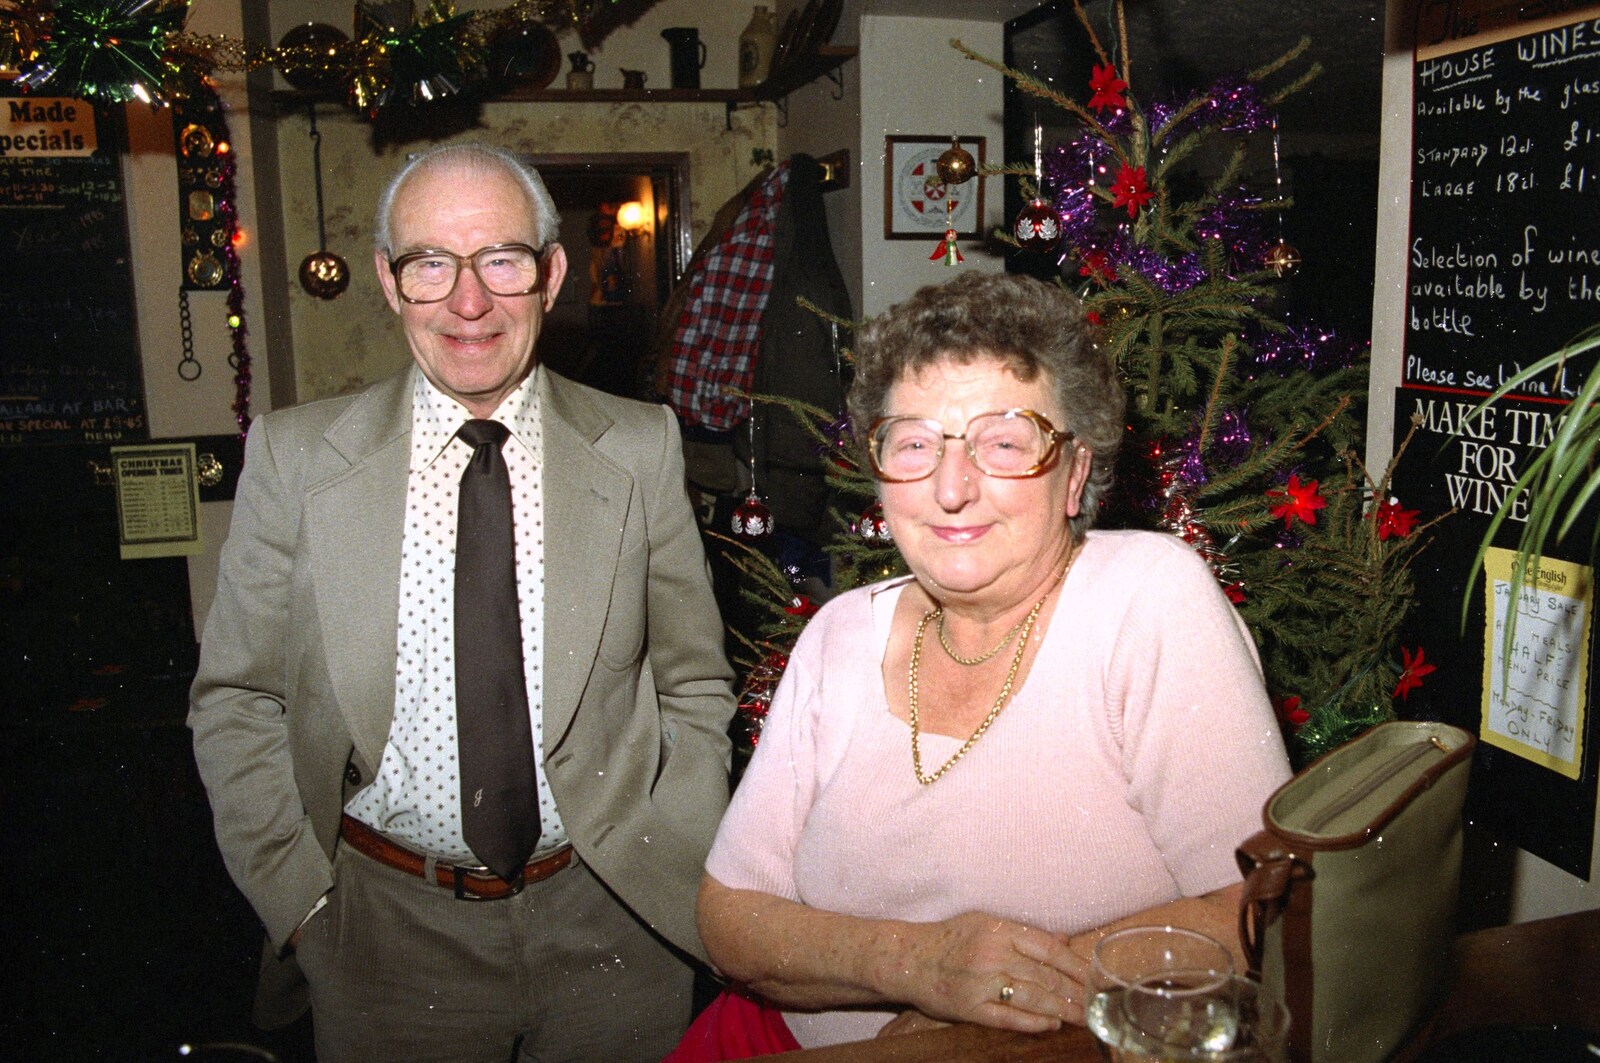 John and Arline again from New Year's Eve at the Swan Inn, Brome, Suffolk - 31st December 1994